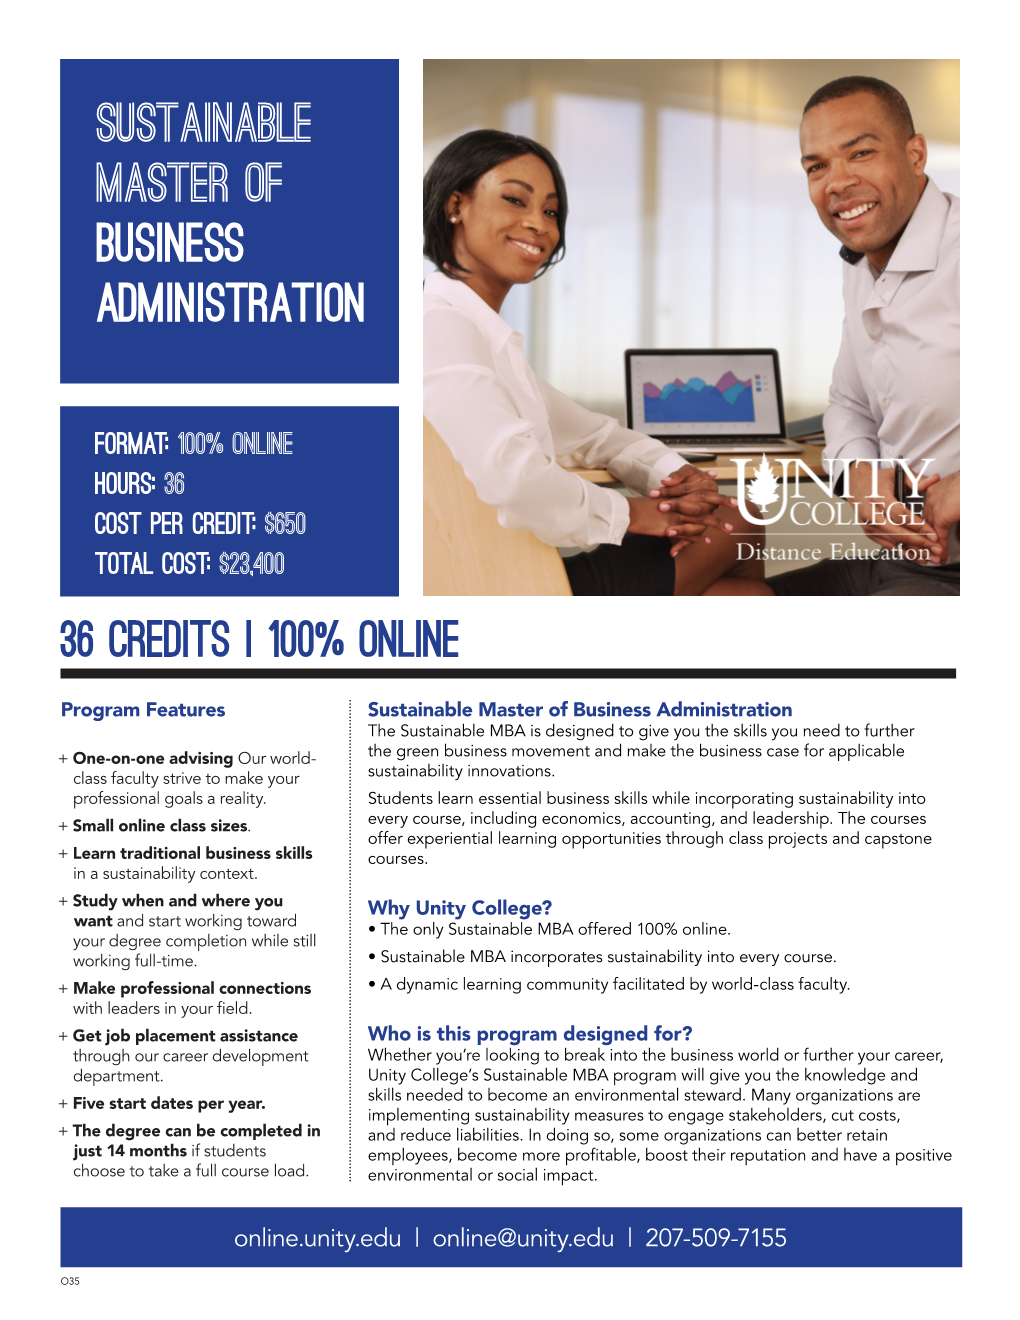 Sustainable MASTER of Business Administration